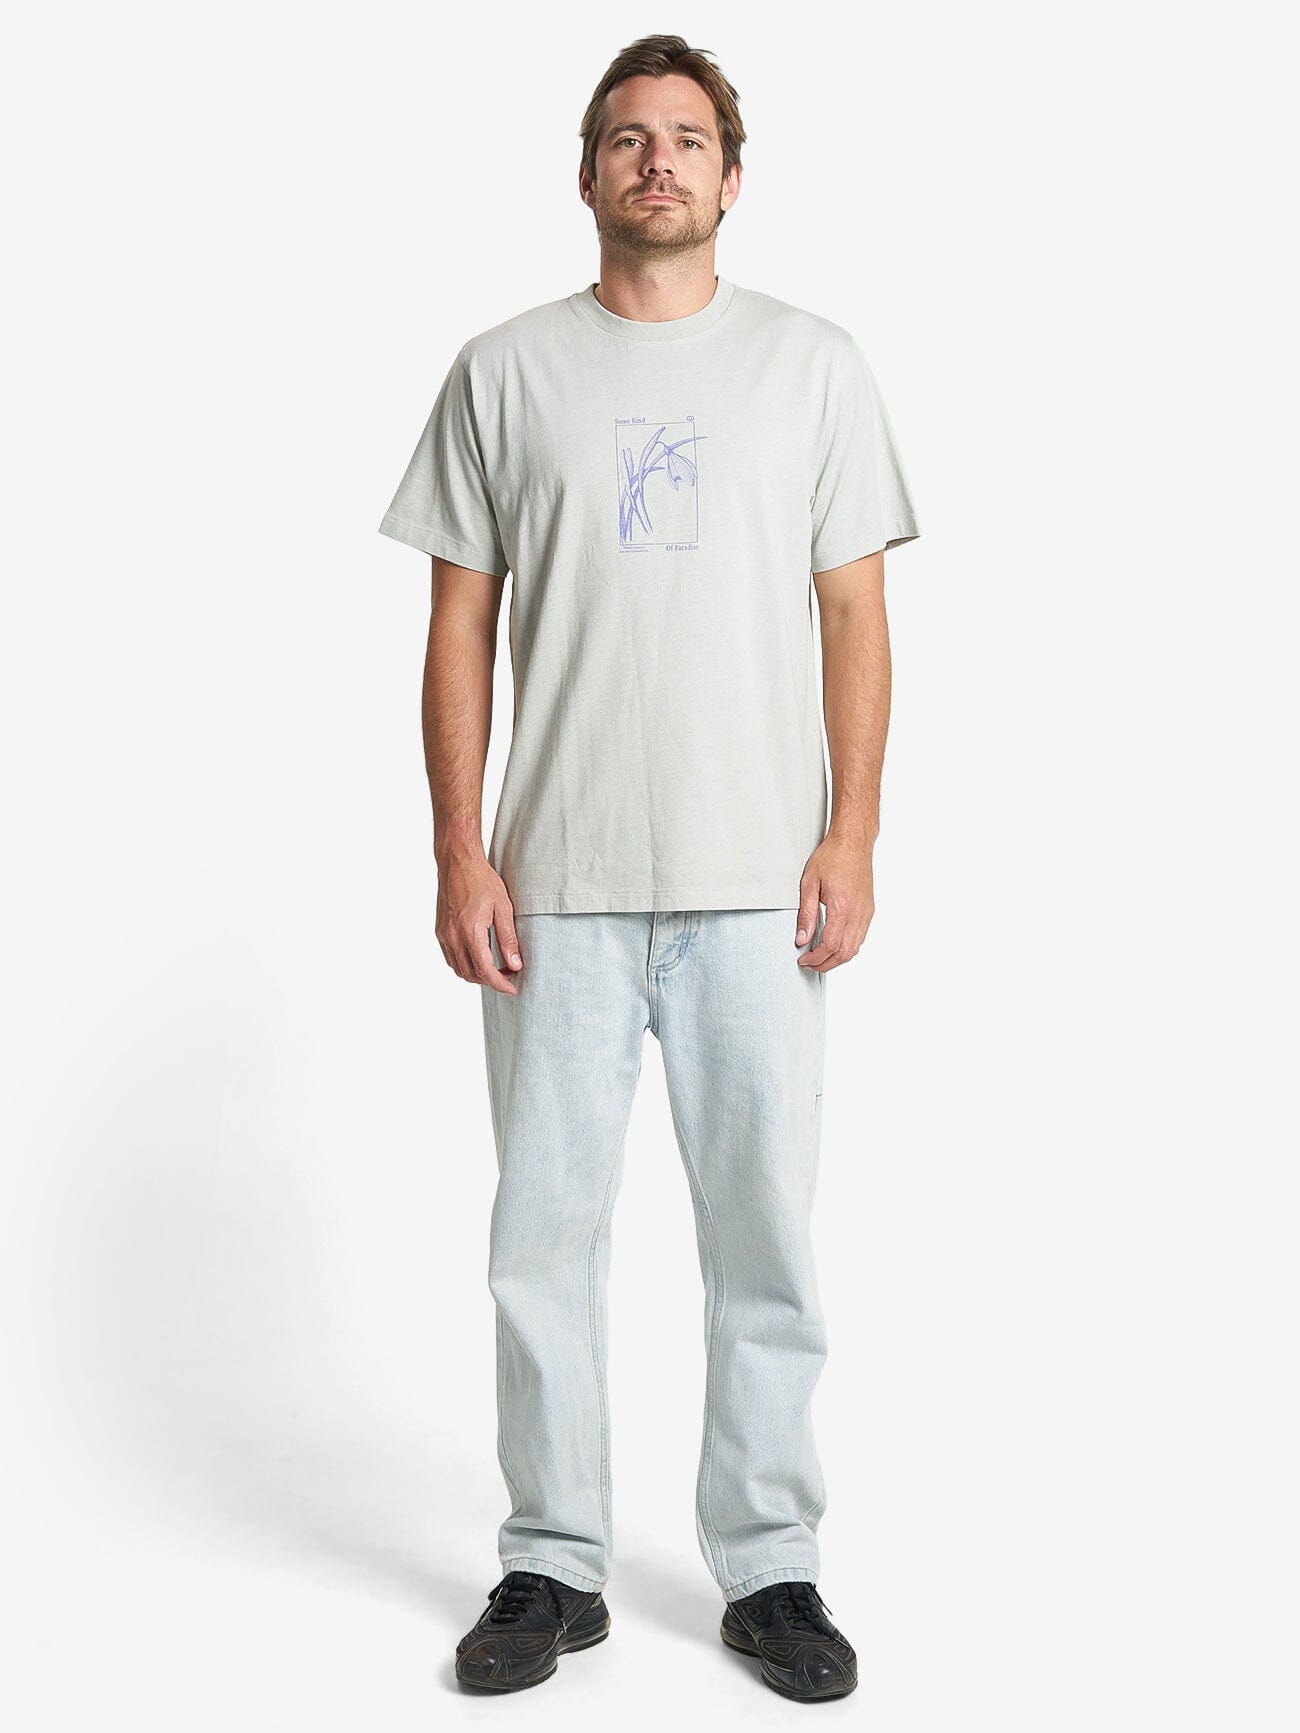 Guided By Voices Merch Fit Tee - Sage Grey